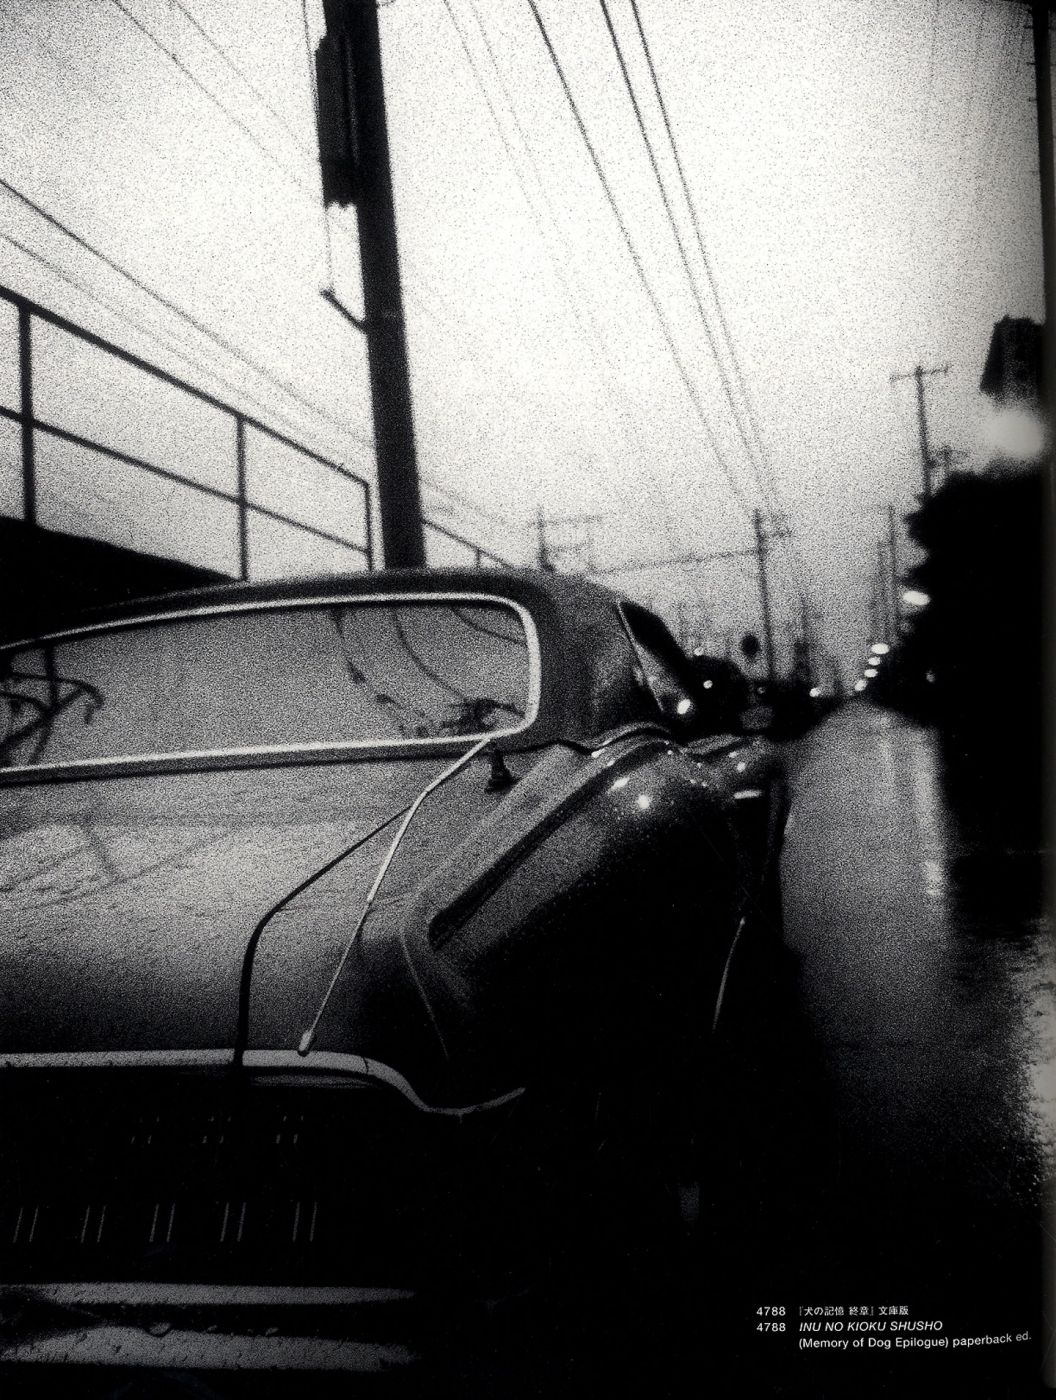 Daido Moriyama: The Complete Works, Volumes 1-4 (1964-2003), Limited Edition (with Type-C Print, "Airplane" Variant) [SIGNED]